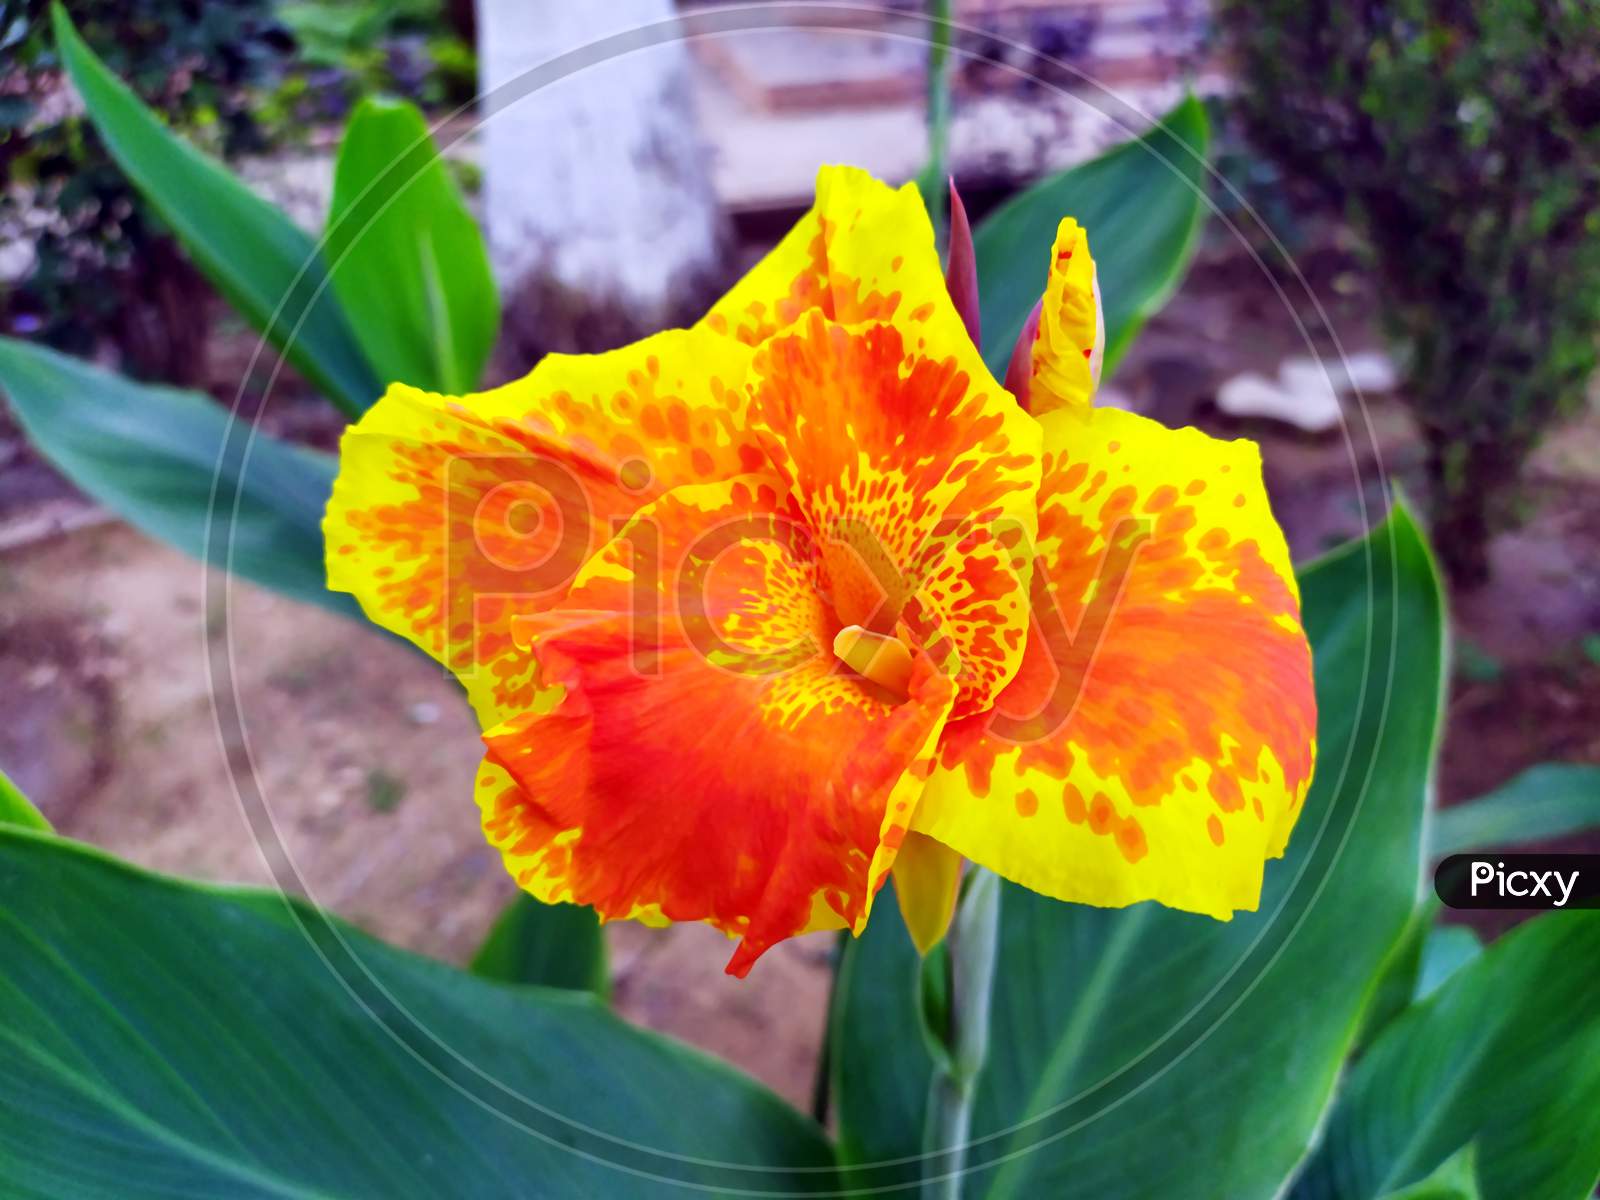 Canna flower also called canna lily in the garden. Beautiful orange and yellow tropical flowers close up.